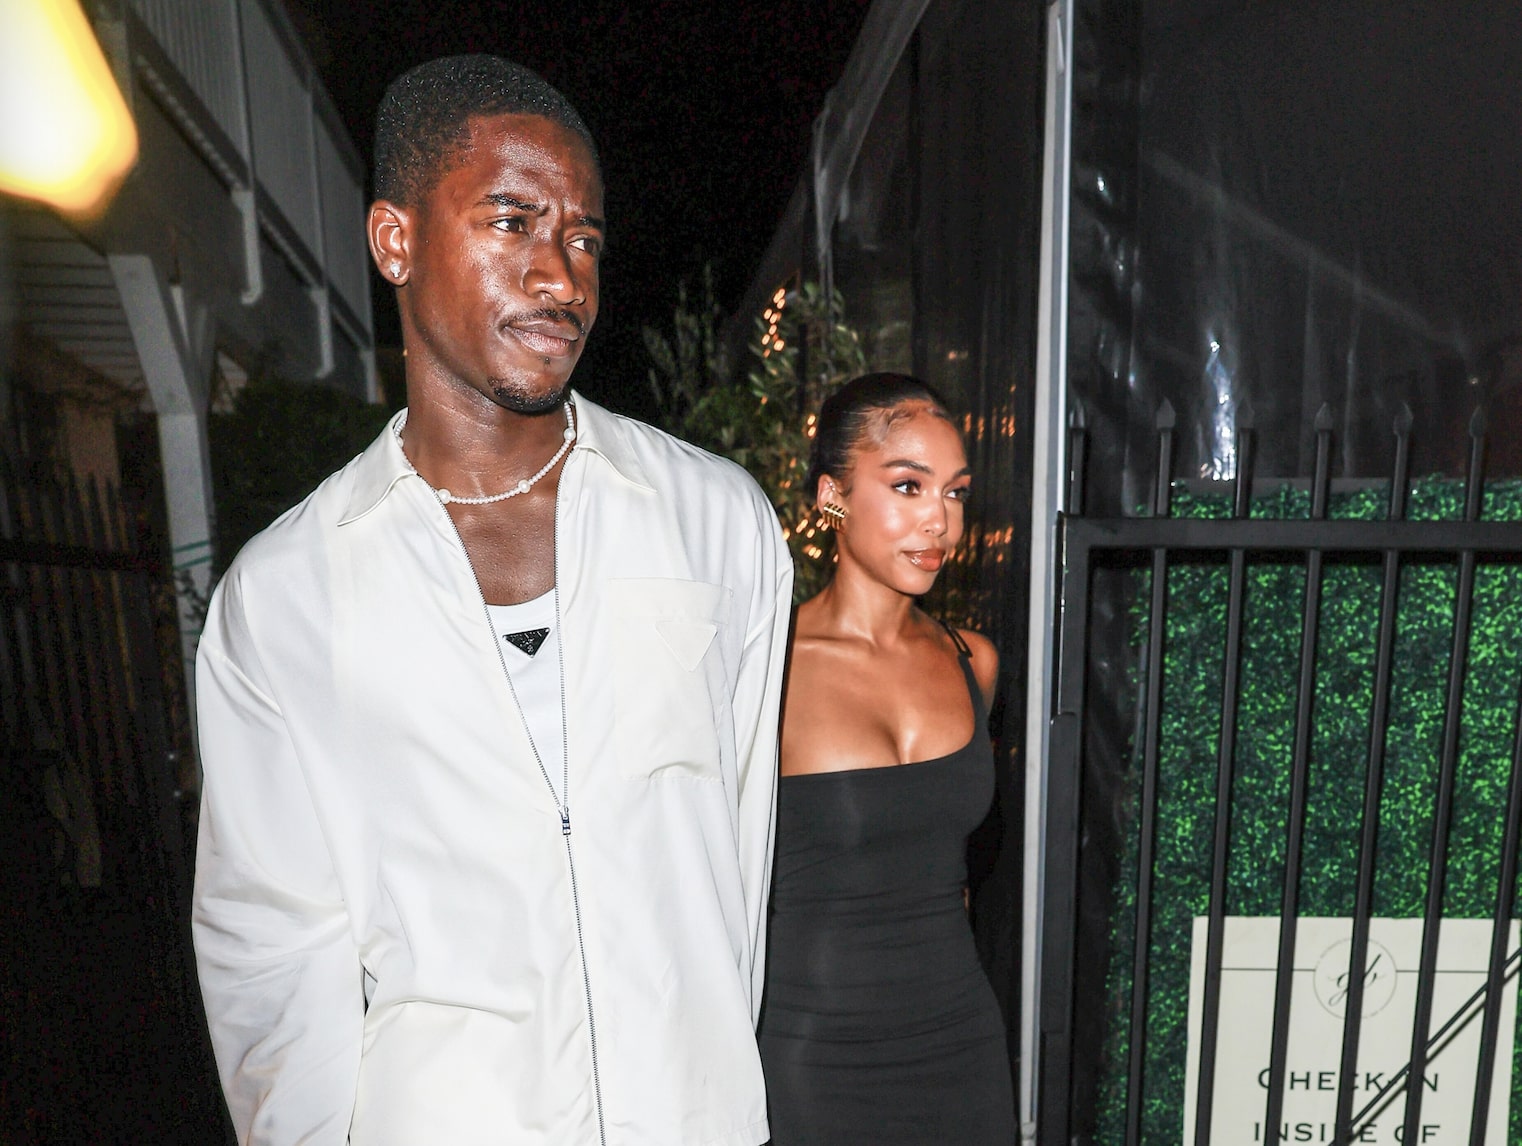 Lori Harvey’s Cutout Catsuit Shows Serious Cleavage During Damson Idris Date Night